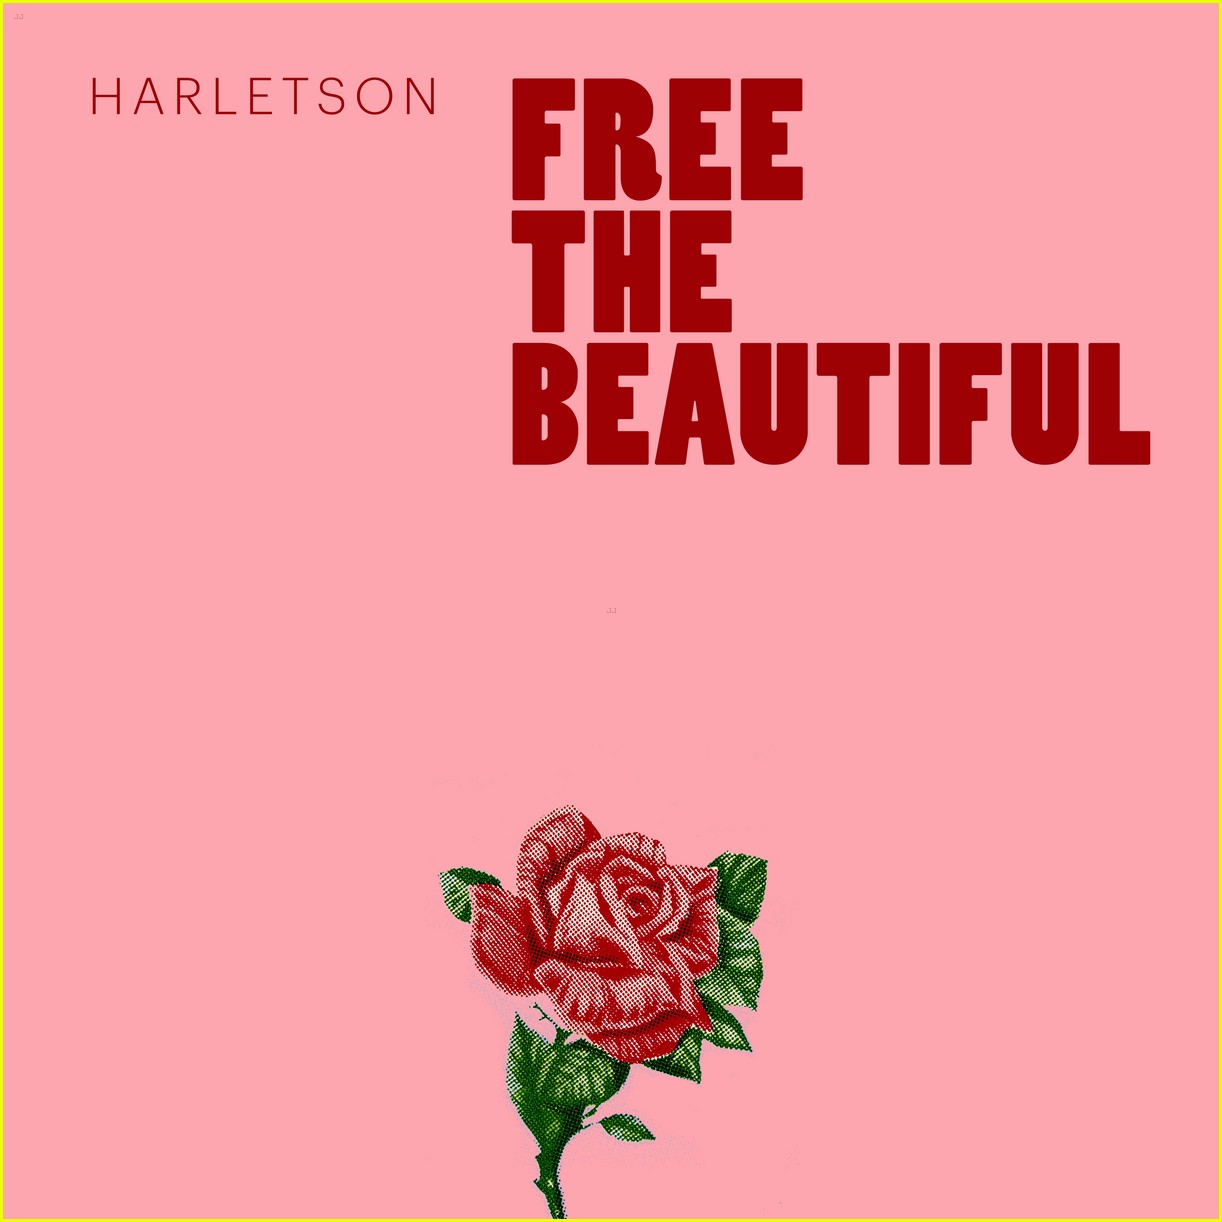 harletson free beautiful song interview 02